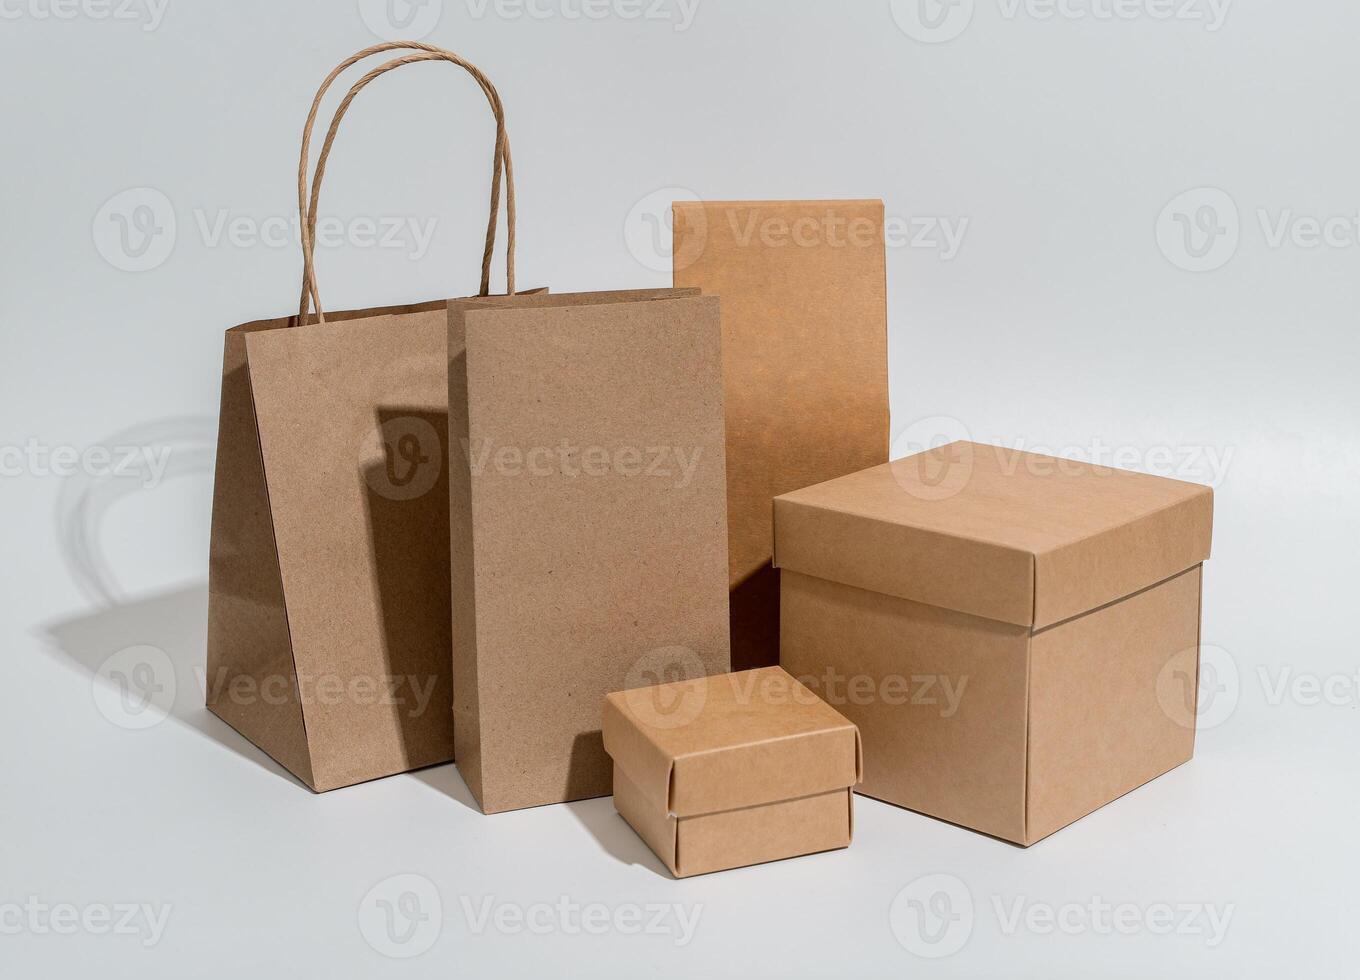 Kraft packages, boxes, bag, brown beige packs for gifts, purchases set photo